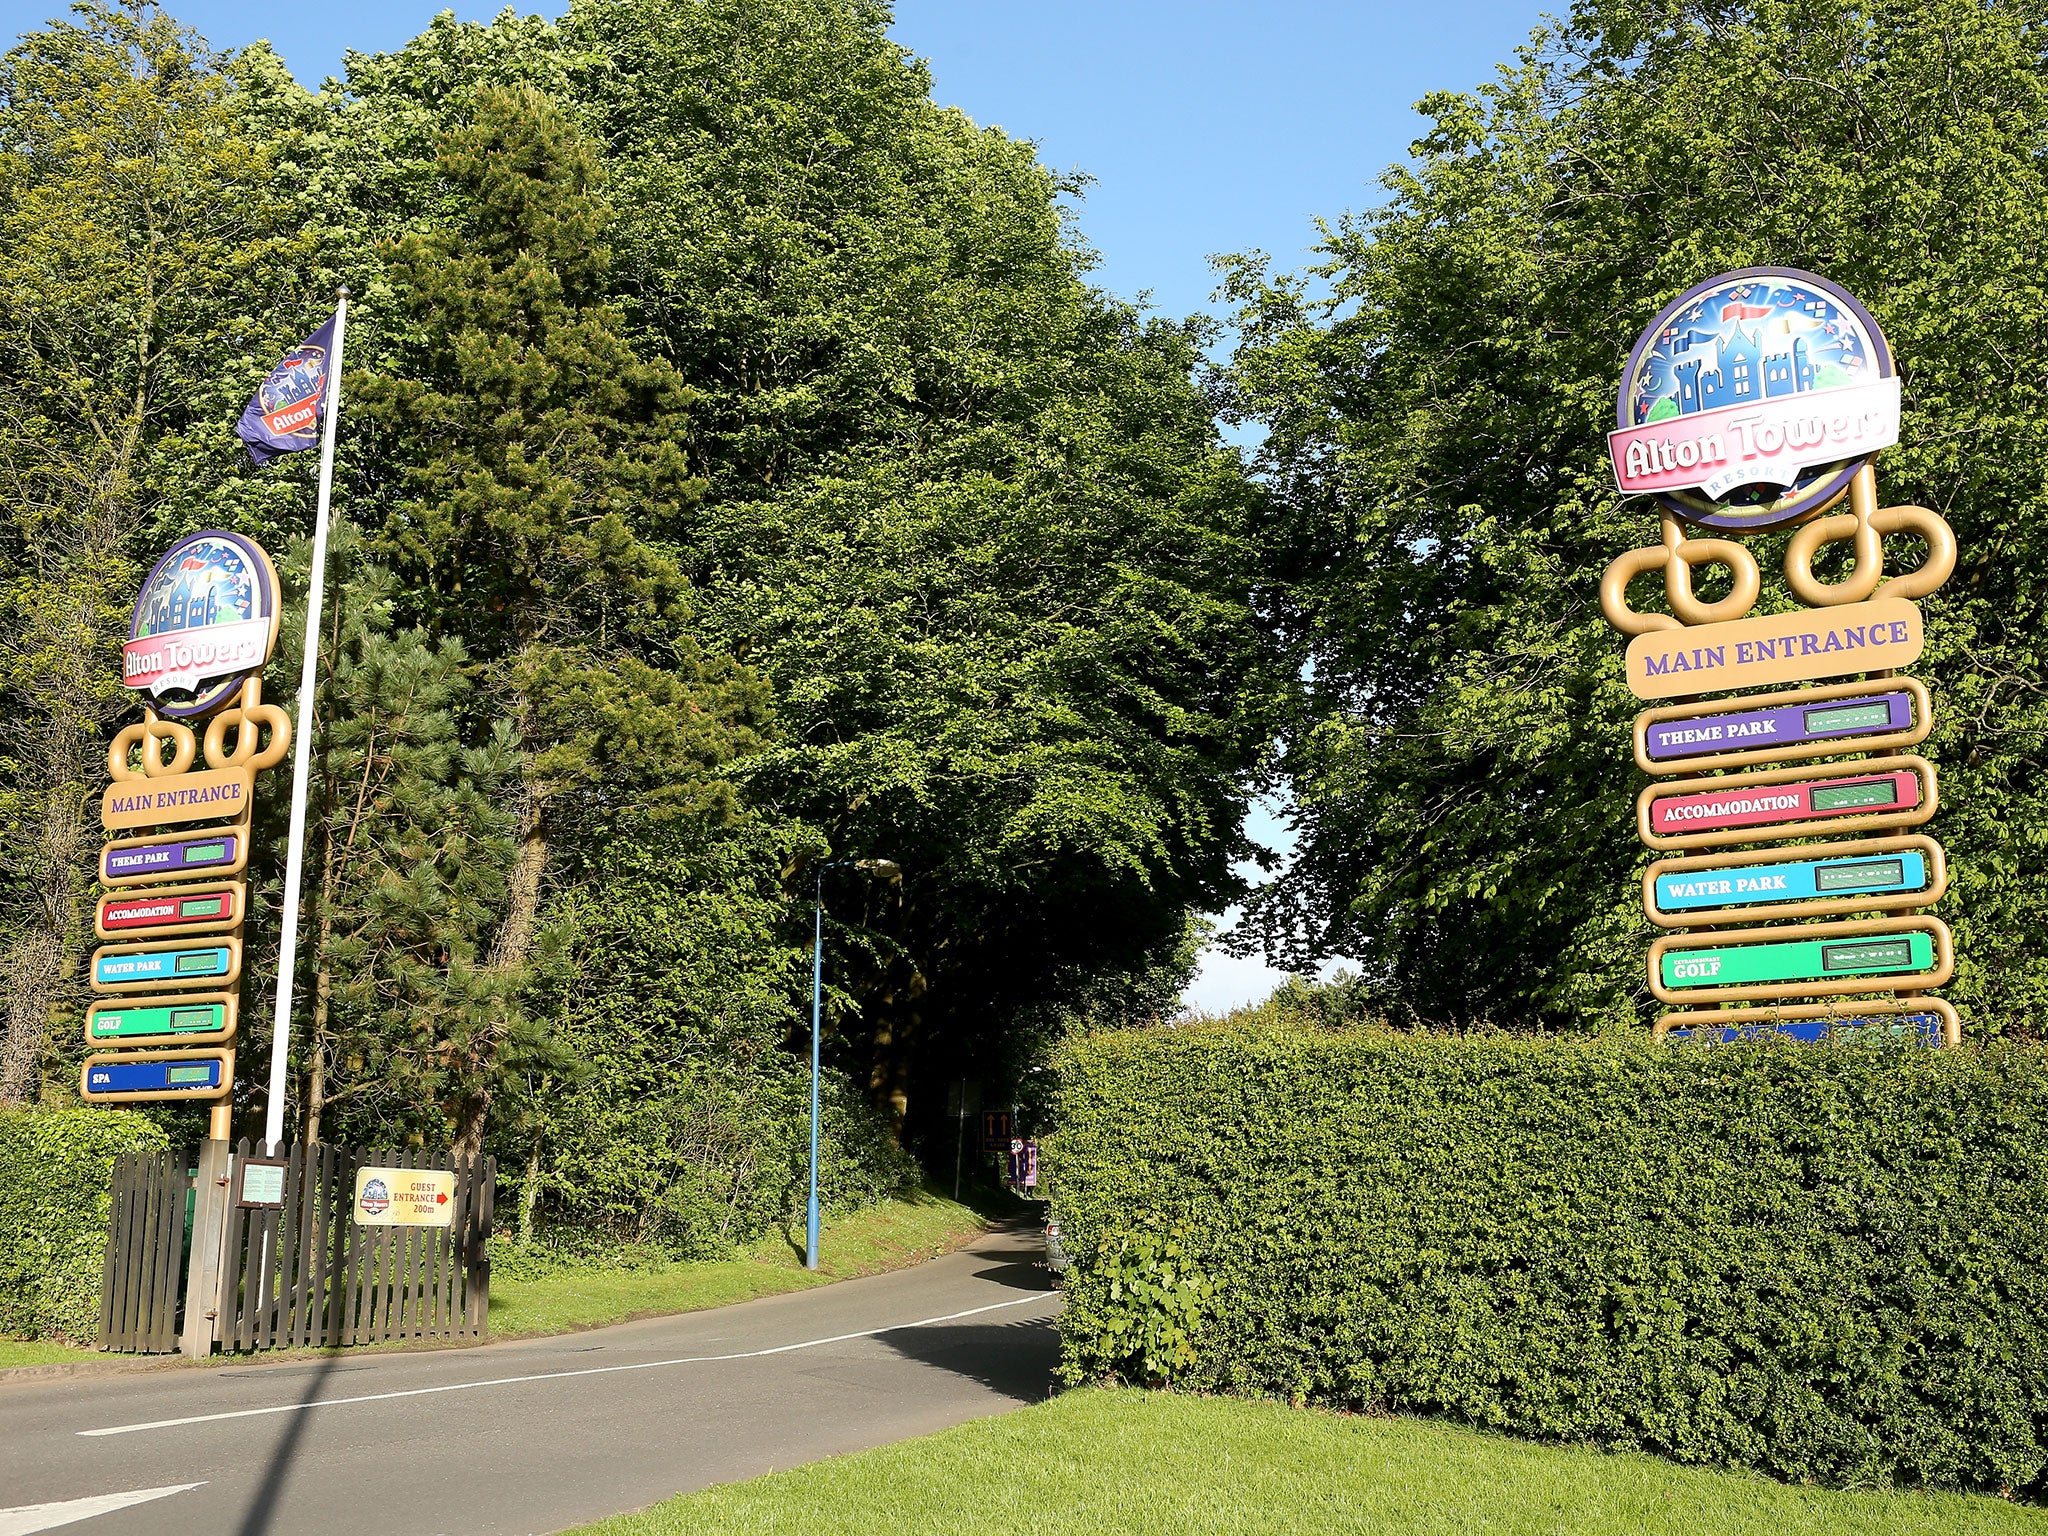 Alton Towers as denied claims that the Sonic Spinball crashed on Tuesday